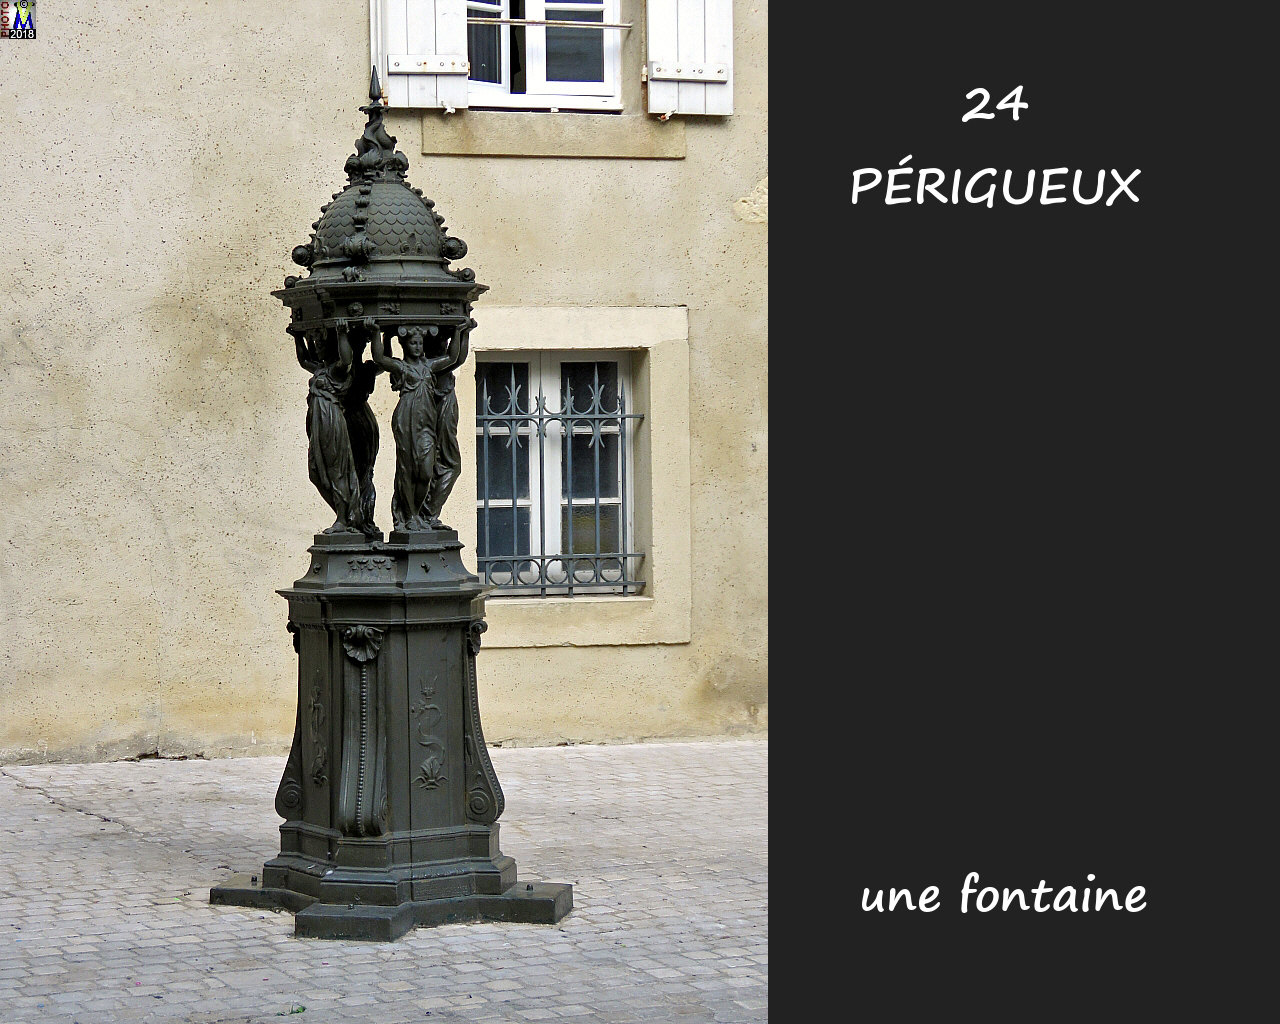 24PERIGUEUX_fontaine_1010.jpg